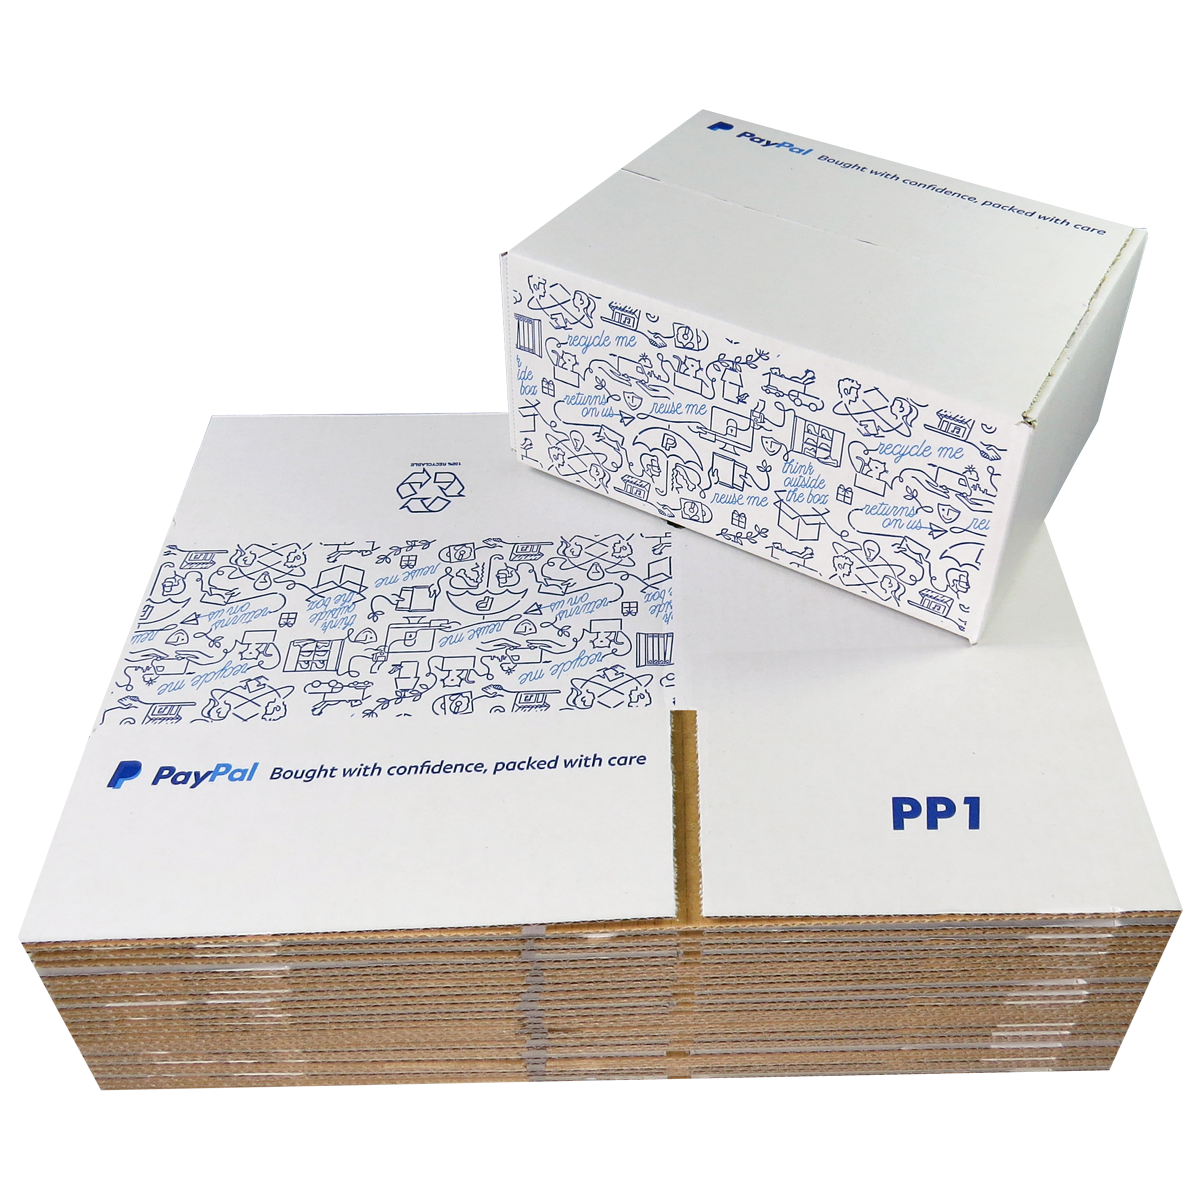 50 x PP1 PayPal Branded Quality White Single Wall Cardboard Postal Mailing Boxes 200x150x90mm